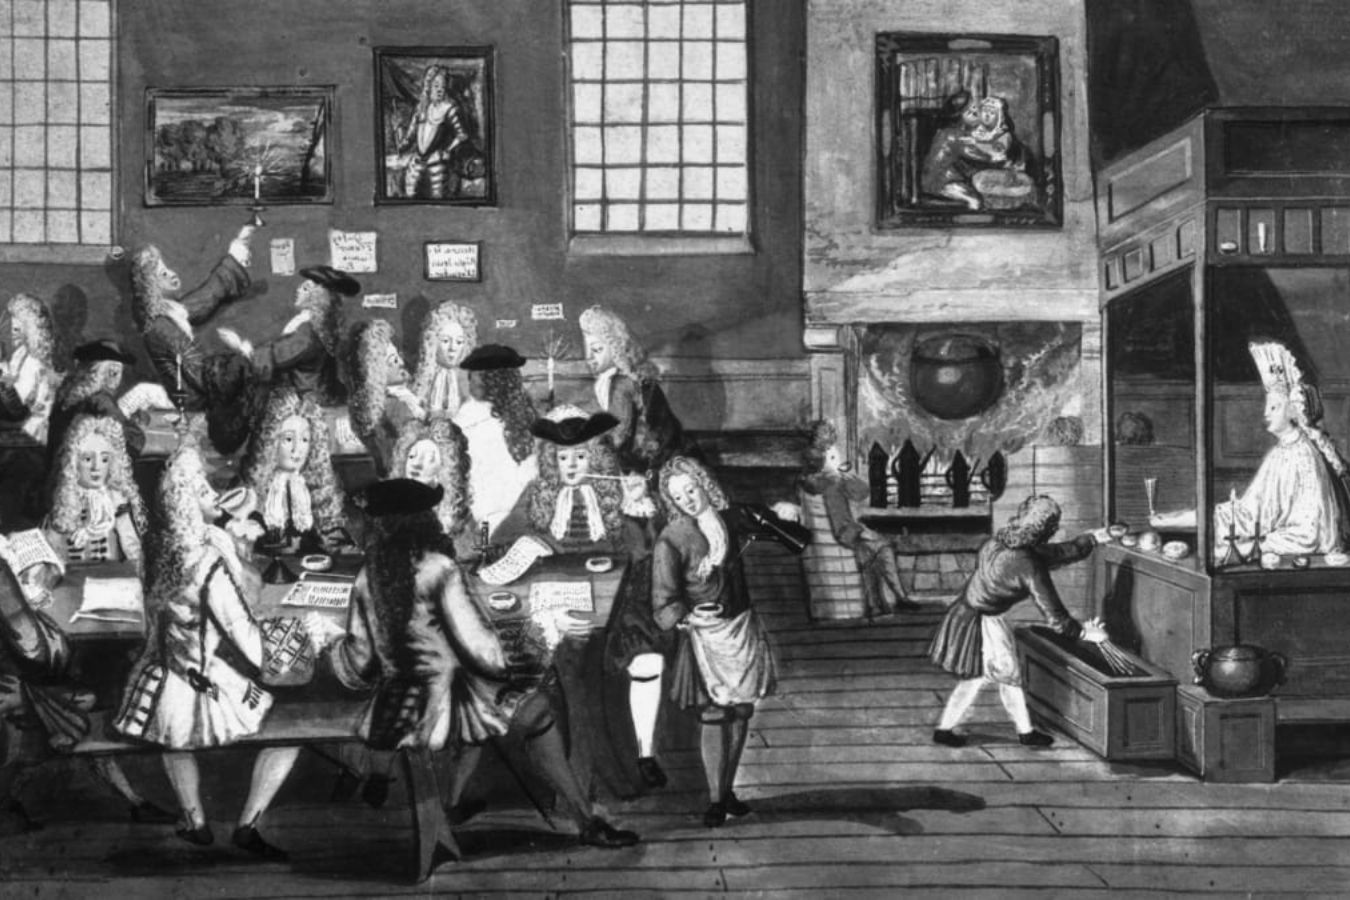 A Short History of Coffee Drinking